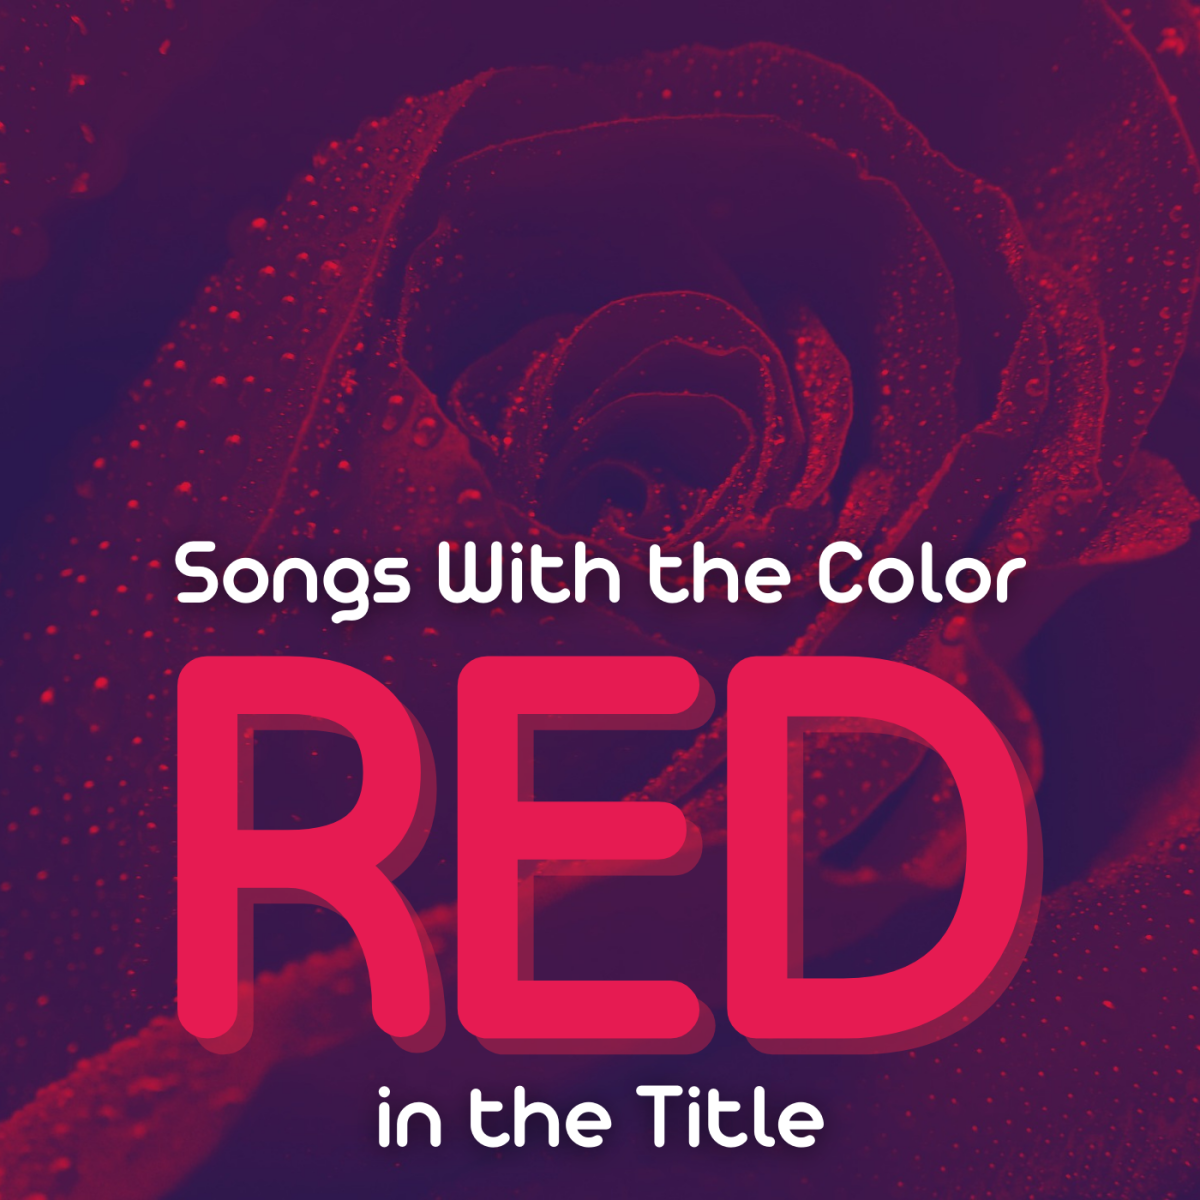 Popular Songs With the Color in the Title - Spinditty